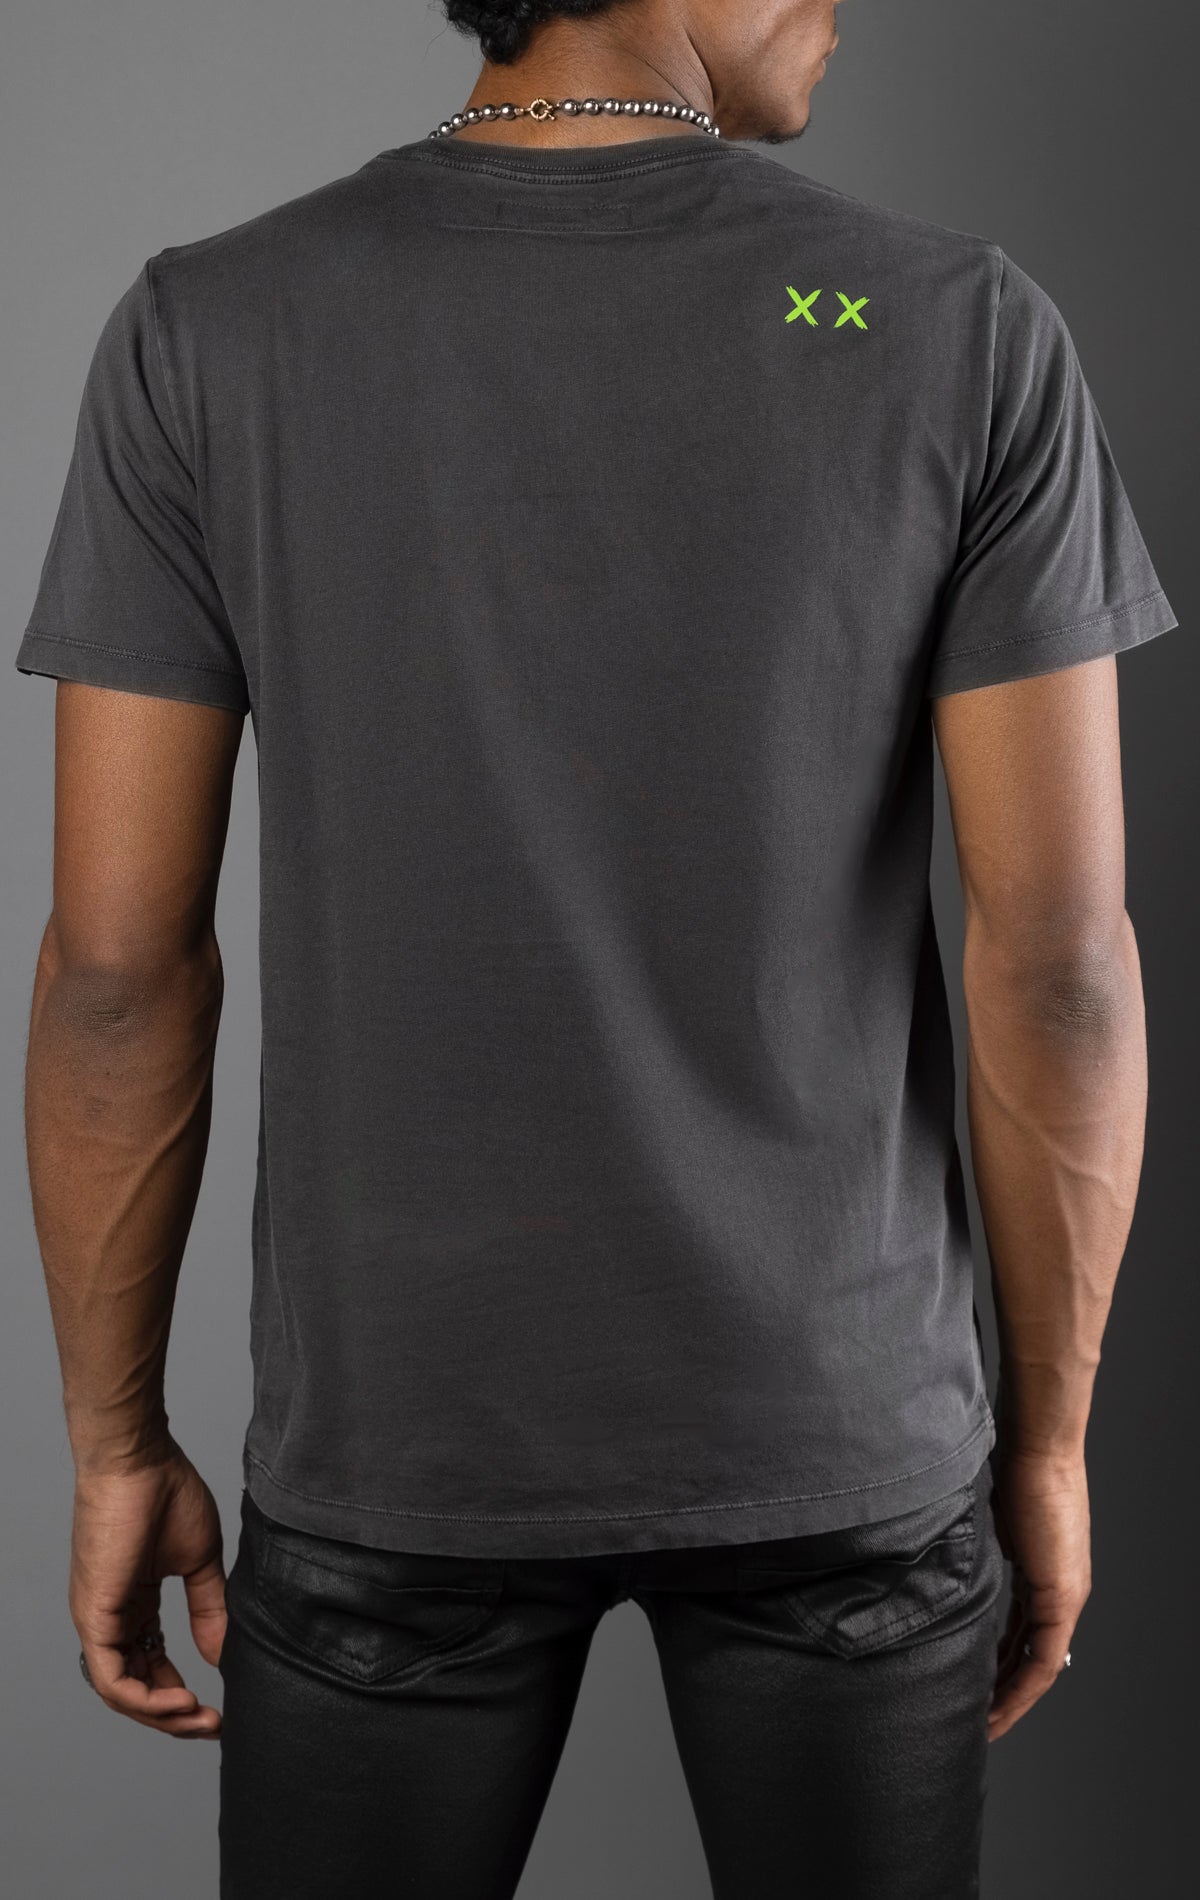 Vintage charcoal cotton tee made from 100% premium cotton